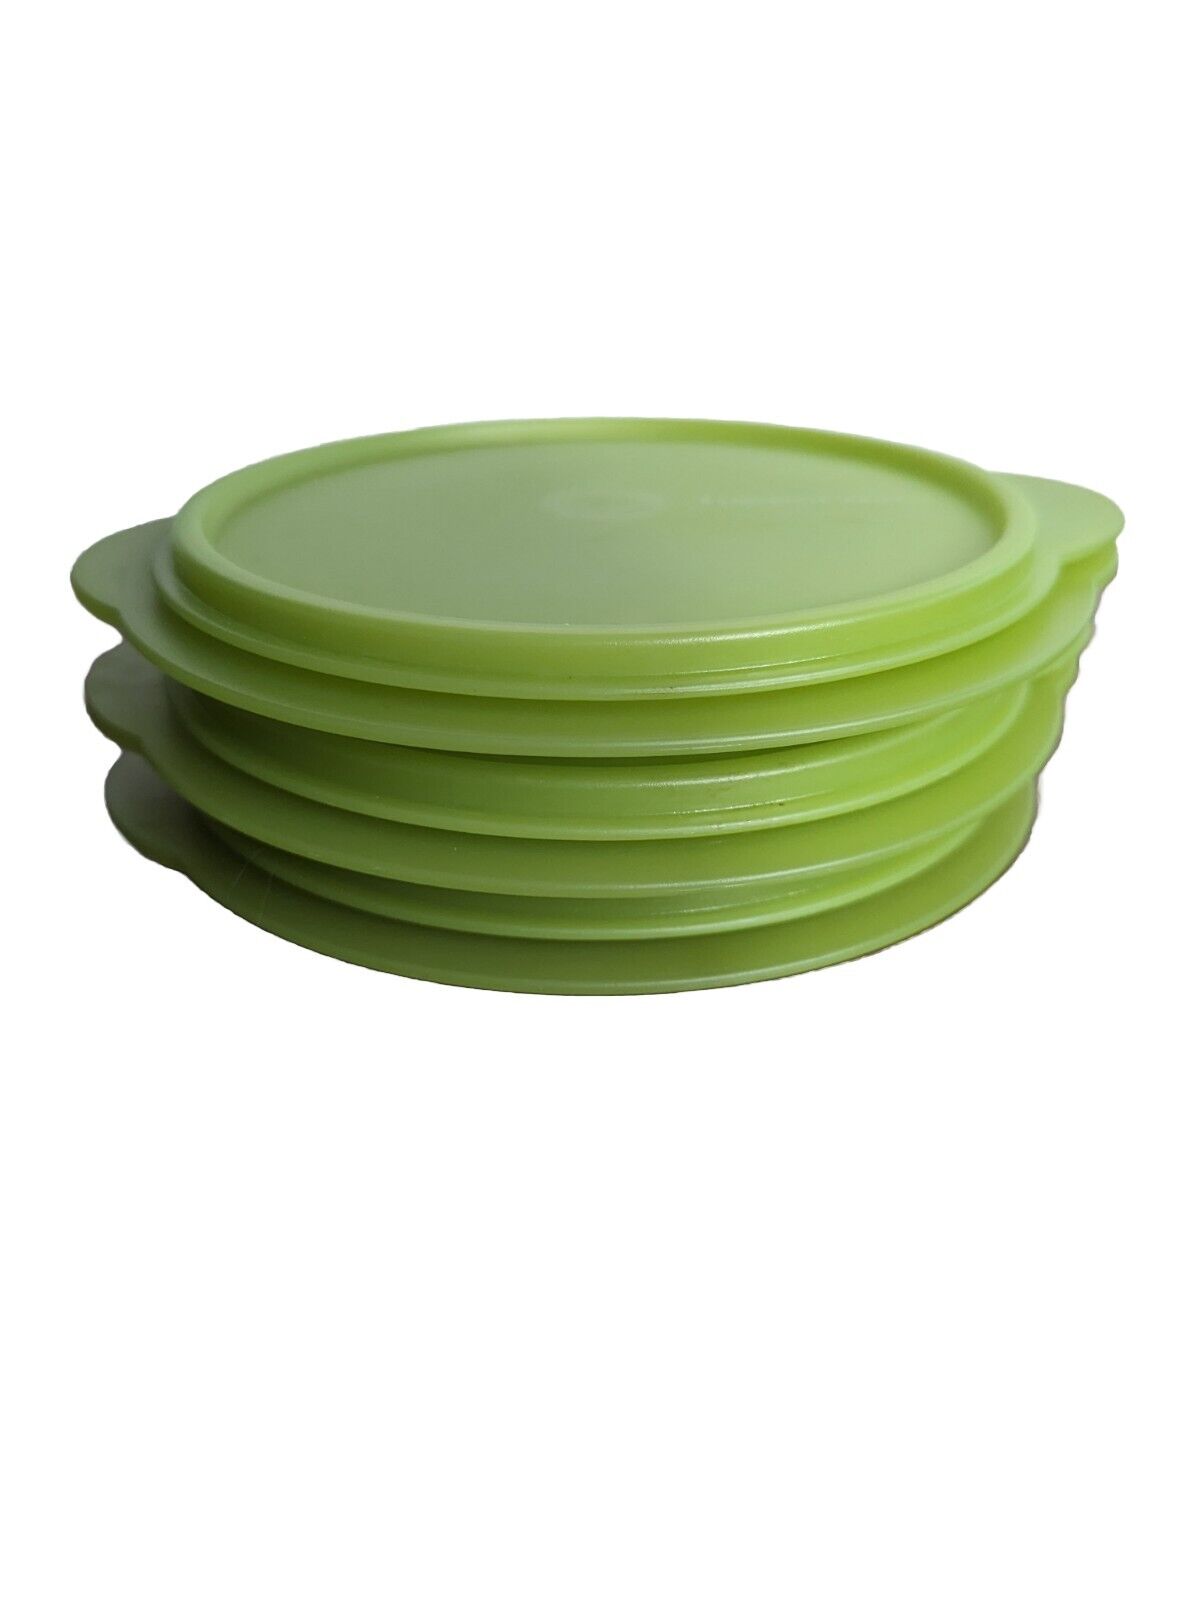 3 X Tupperware #5452A Flat Out  Collapsible Container Bowl Green 3 Cup Retired